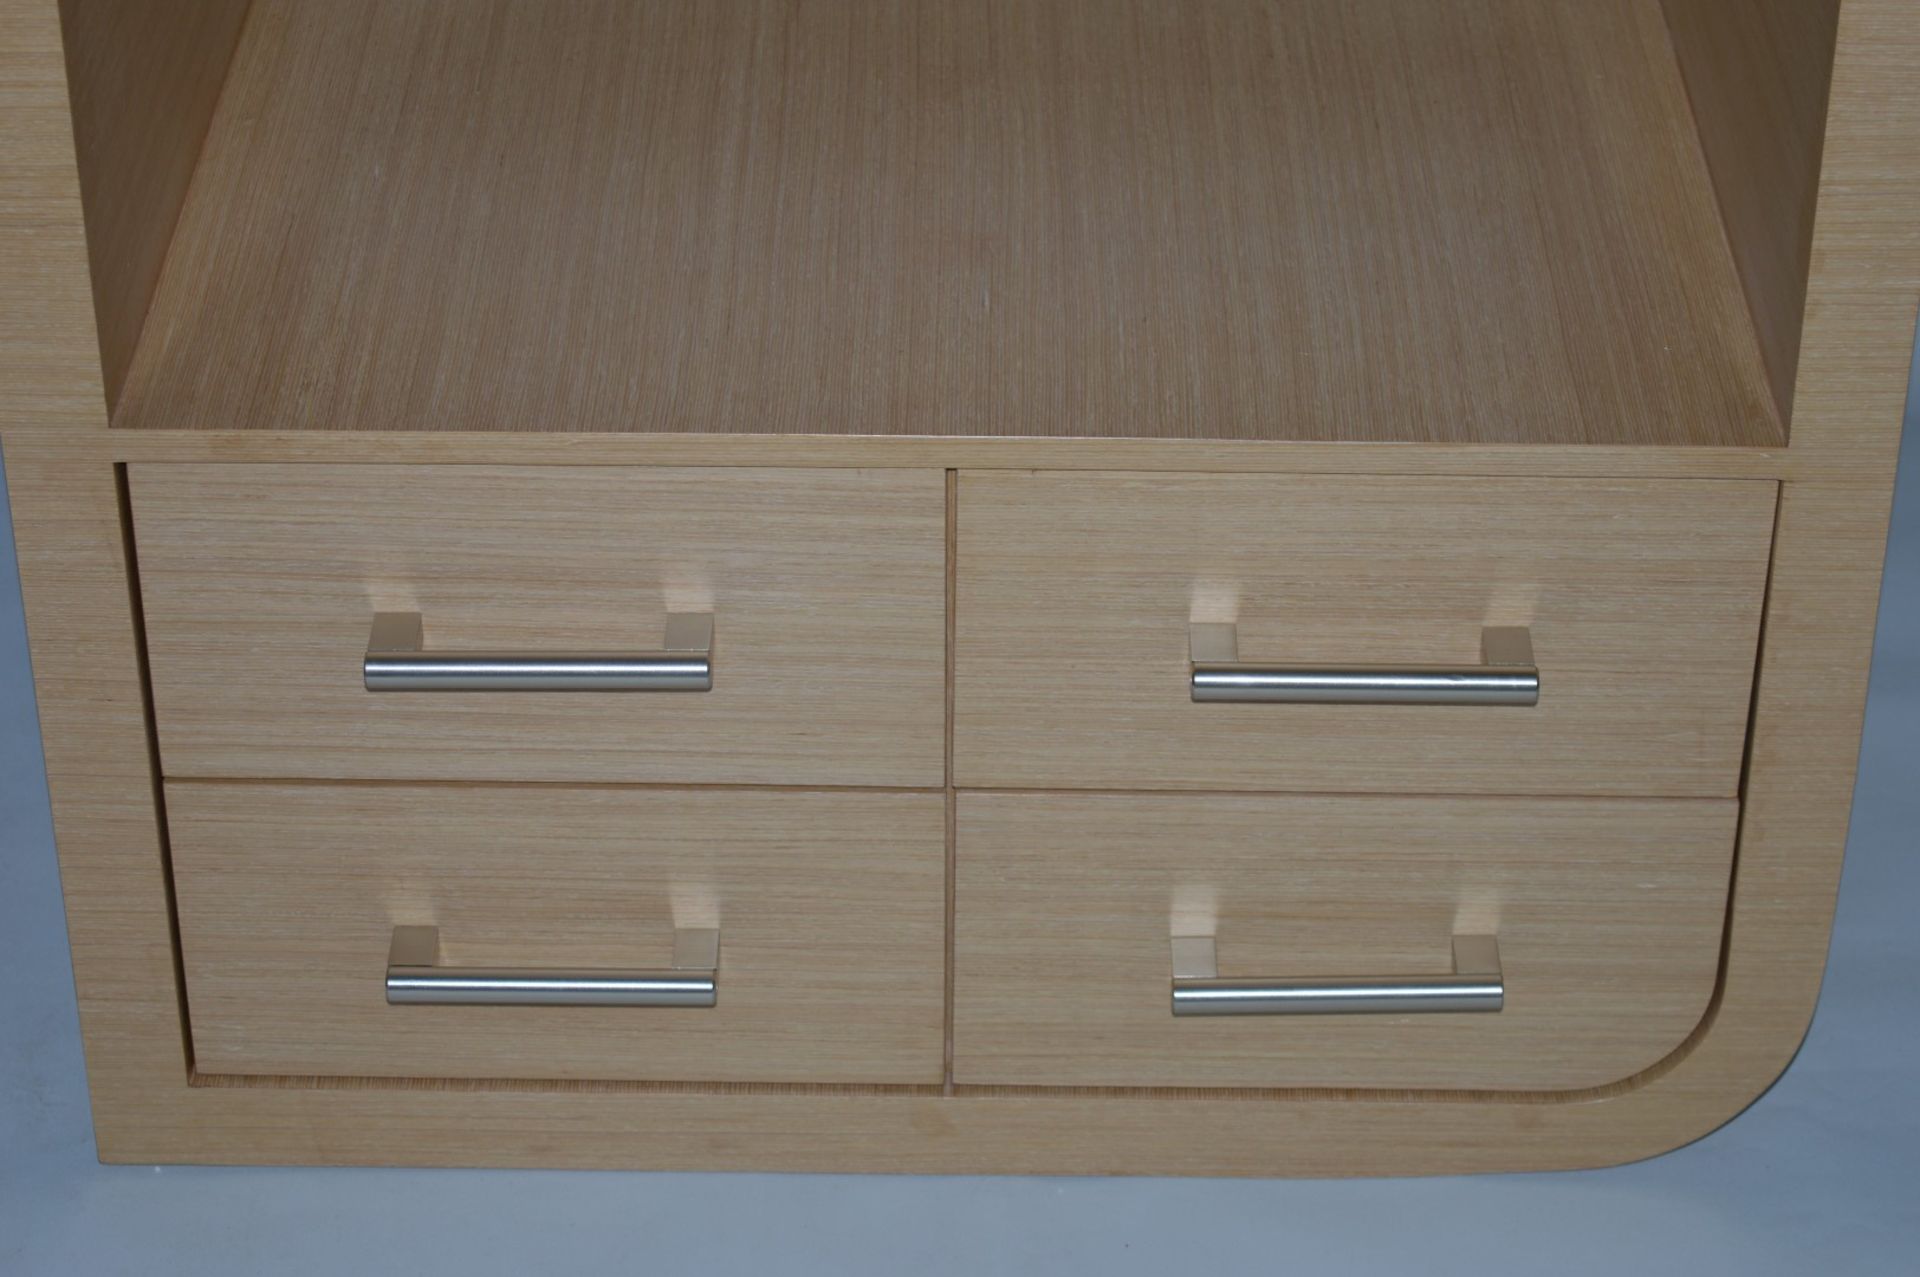 1 x Vogue ARC Series 1 Type C Bathroom VANITY UNIT in LIGHT OAK - 1600mm Width - Manufactured to the - Image 4 of 7